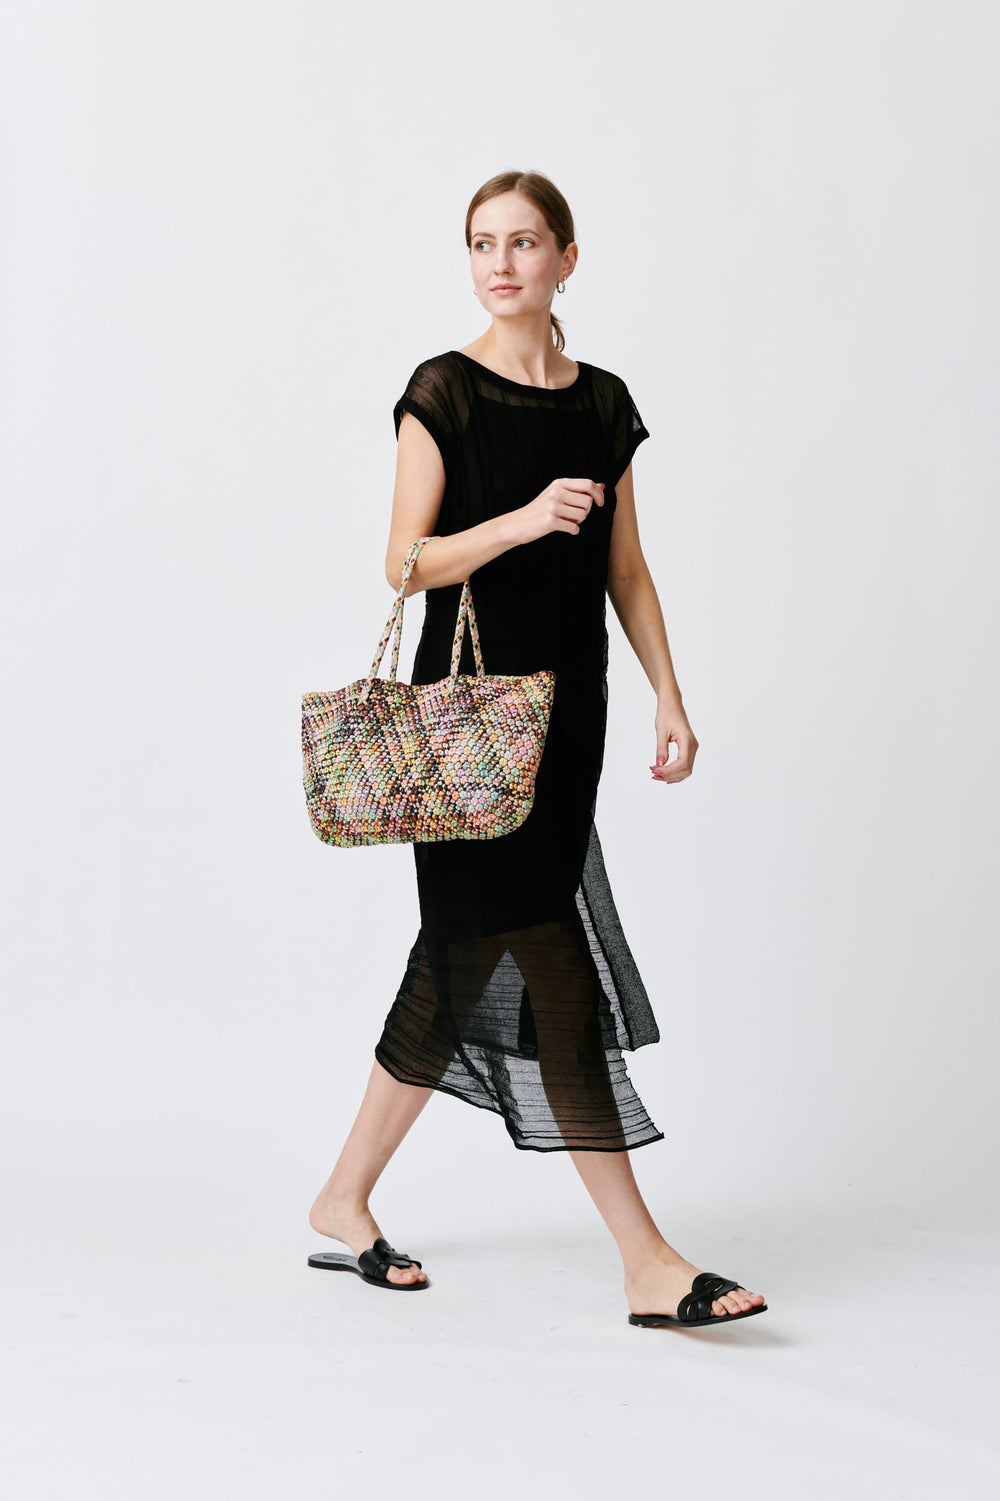 Dragon Diffusion woven leather bag handmade - Octo Multi Pastels